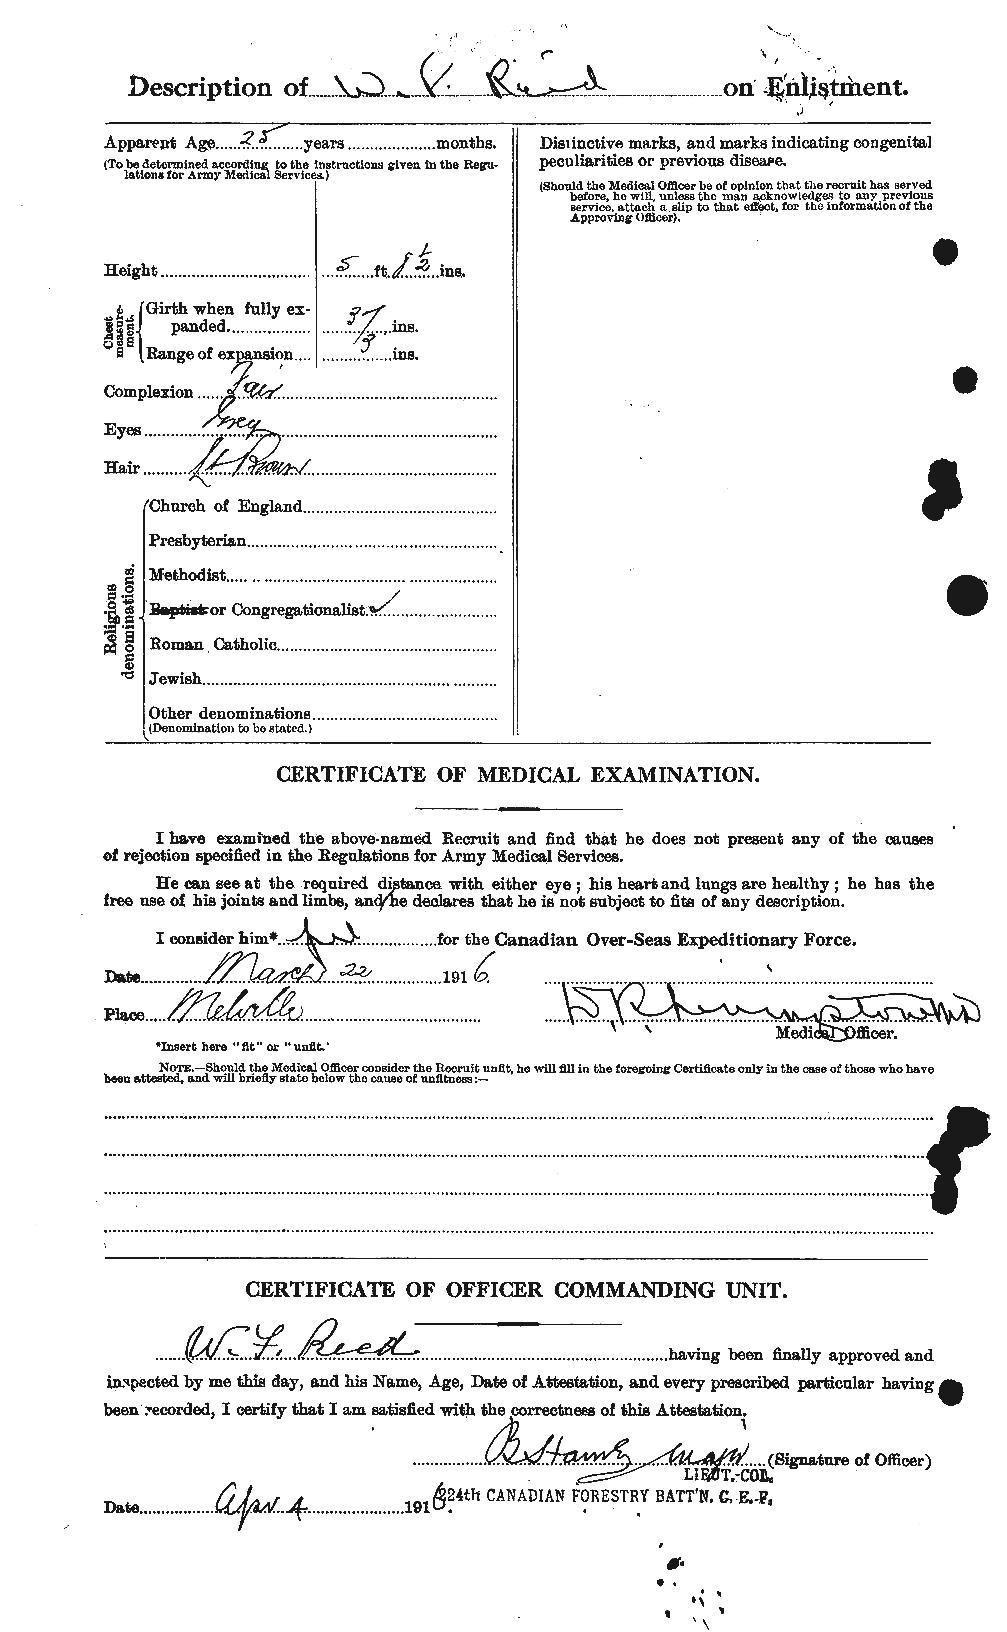 Personnel Records of the First World War - CEF 596984b